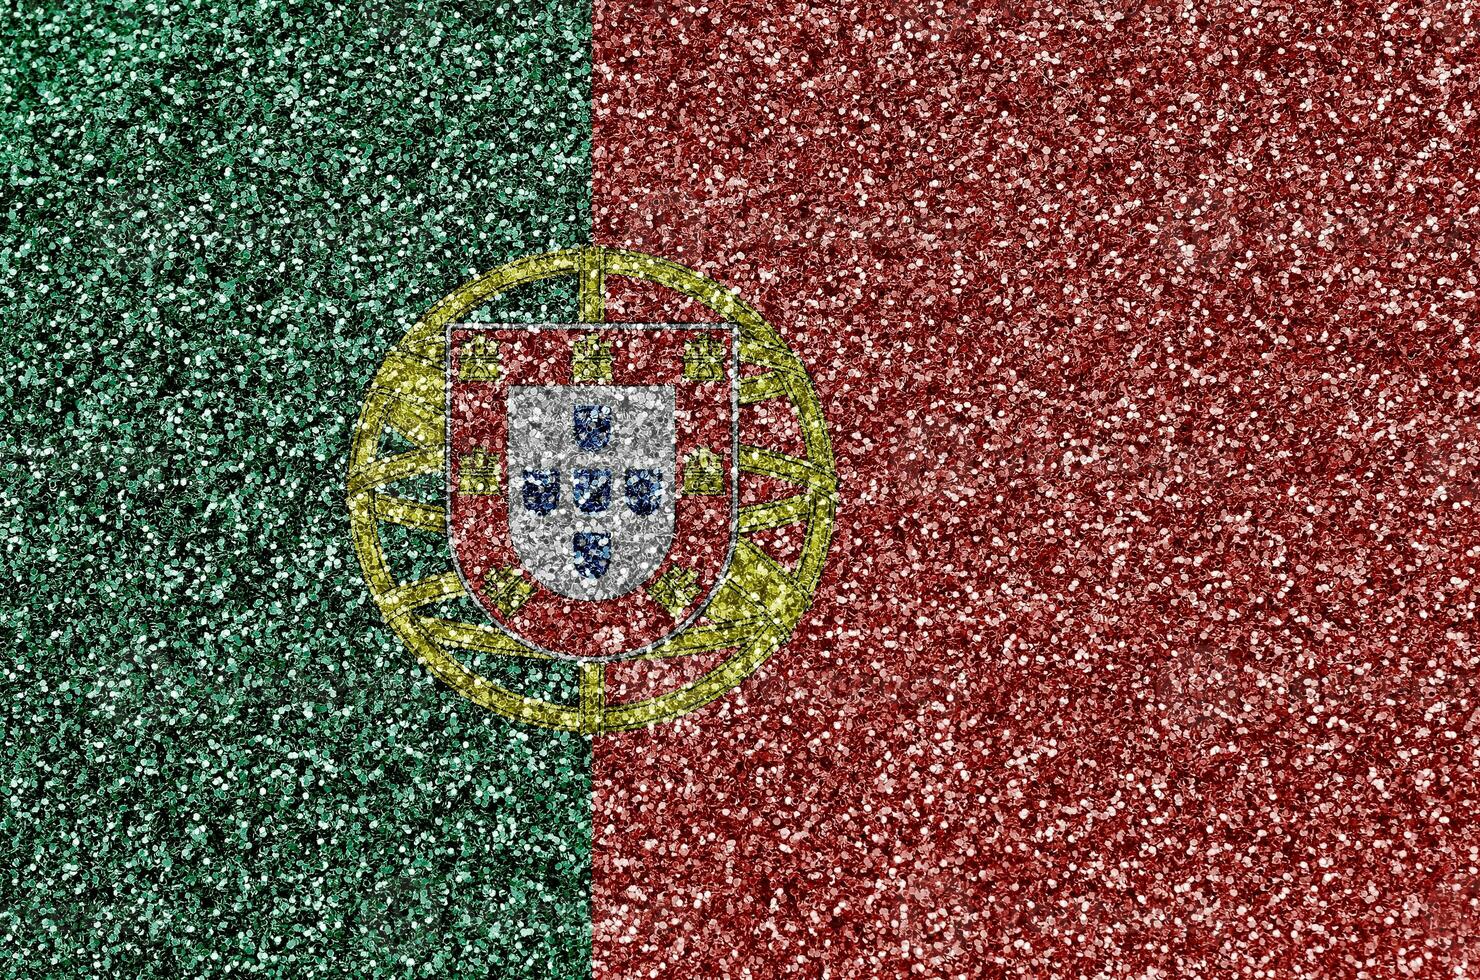 Portugal flag depicted on many small shiny sequins. Colorful festival background for party photo